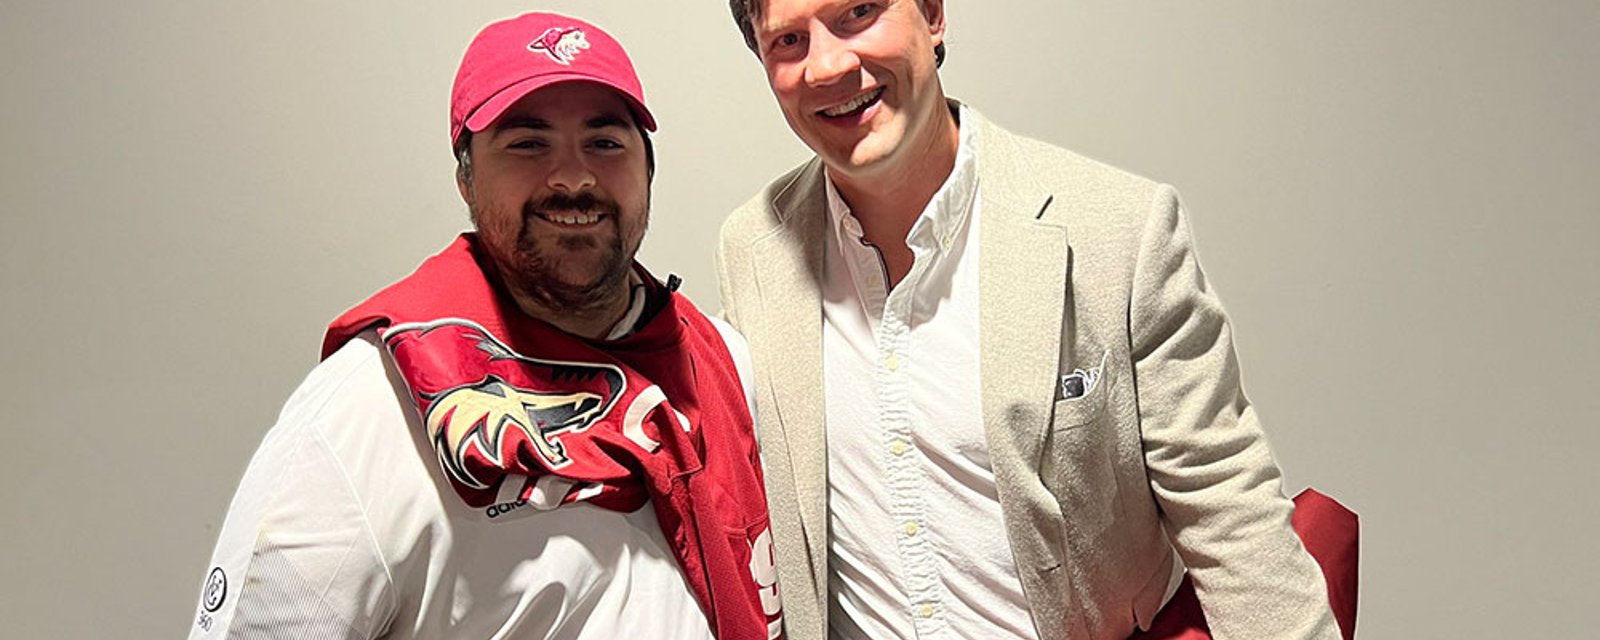 Shane Doan's #19 banner recovered from the dumpster and returned to him